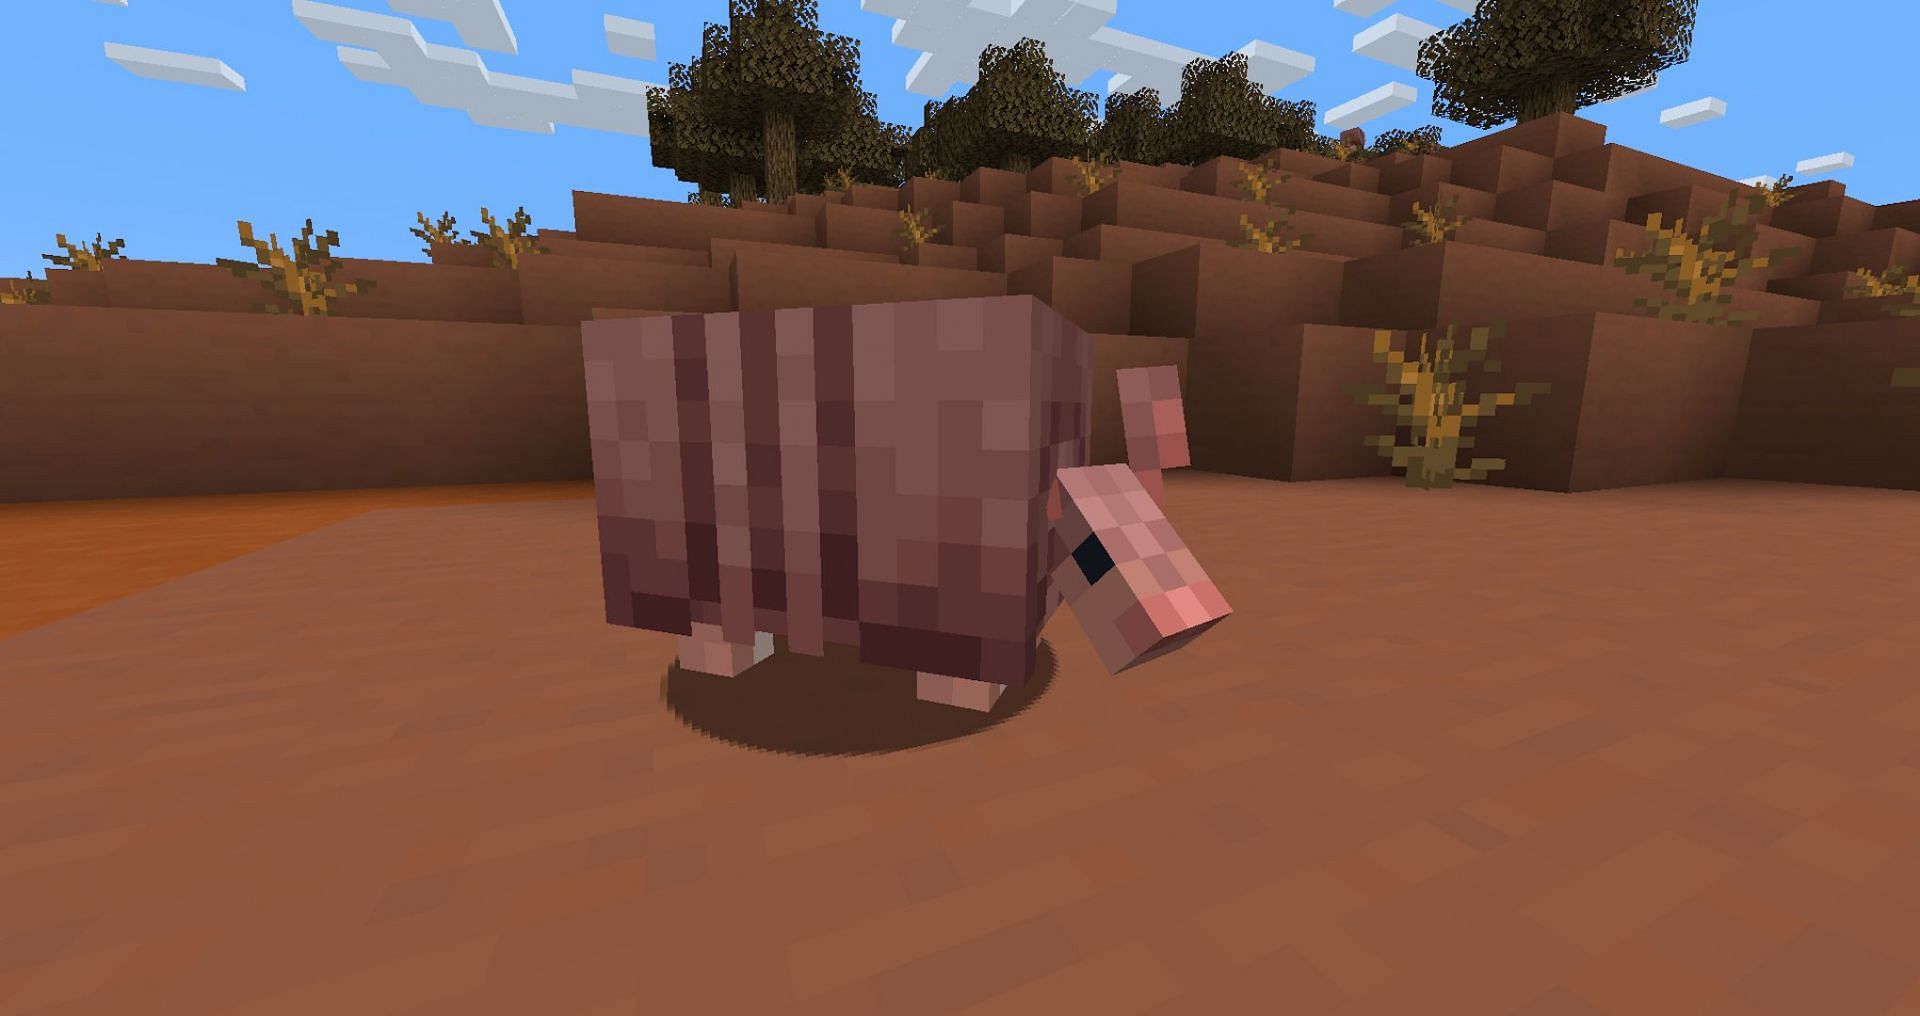 Finding armadillos should be easy due to their pink coloration (Image via Mojang)